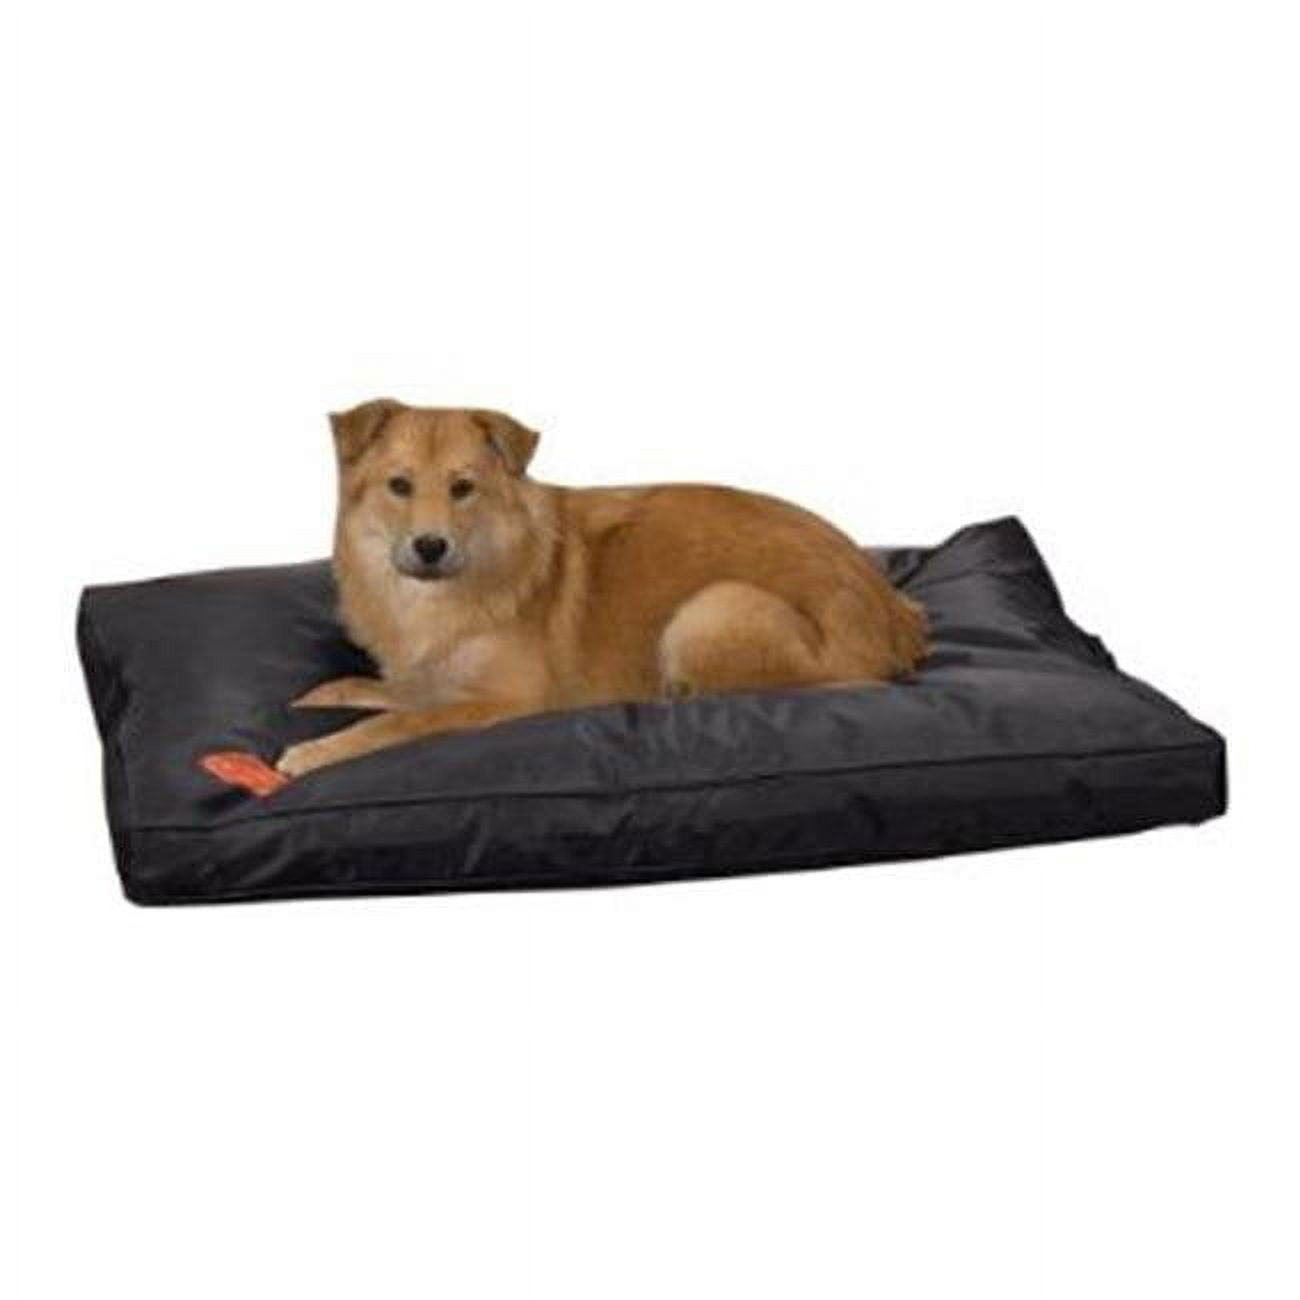 Disc-O-Bed Dog Bed with Foot Pads